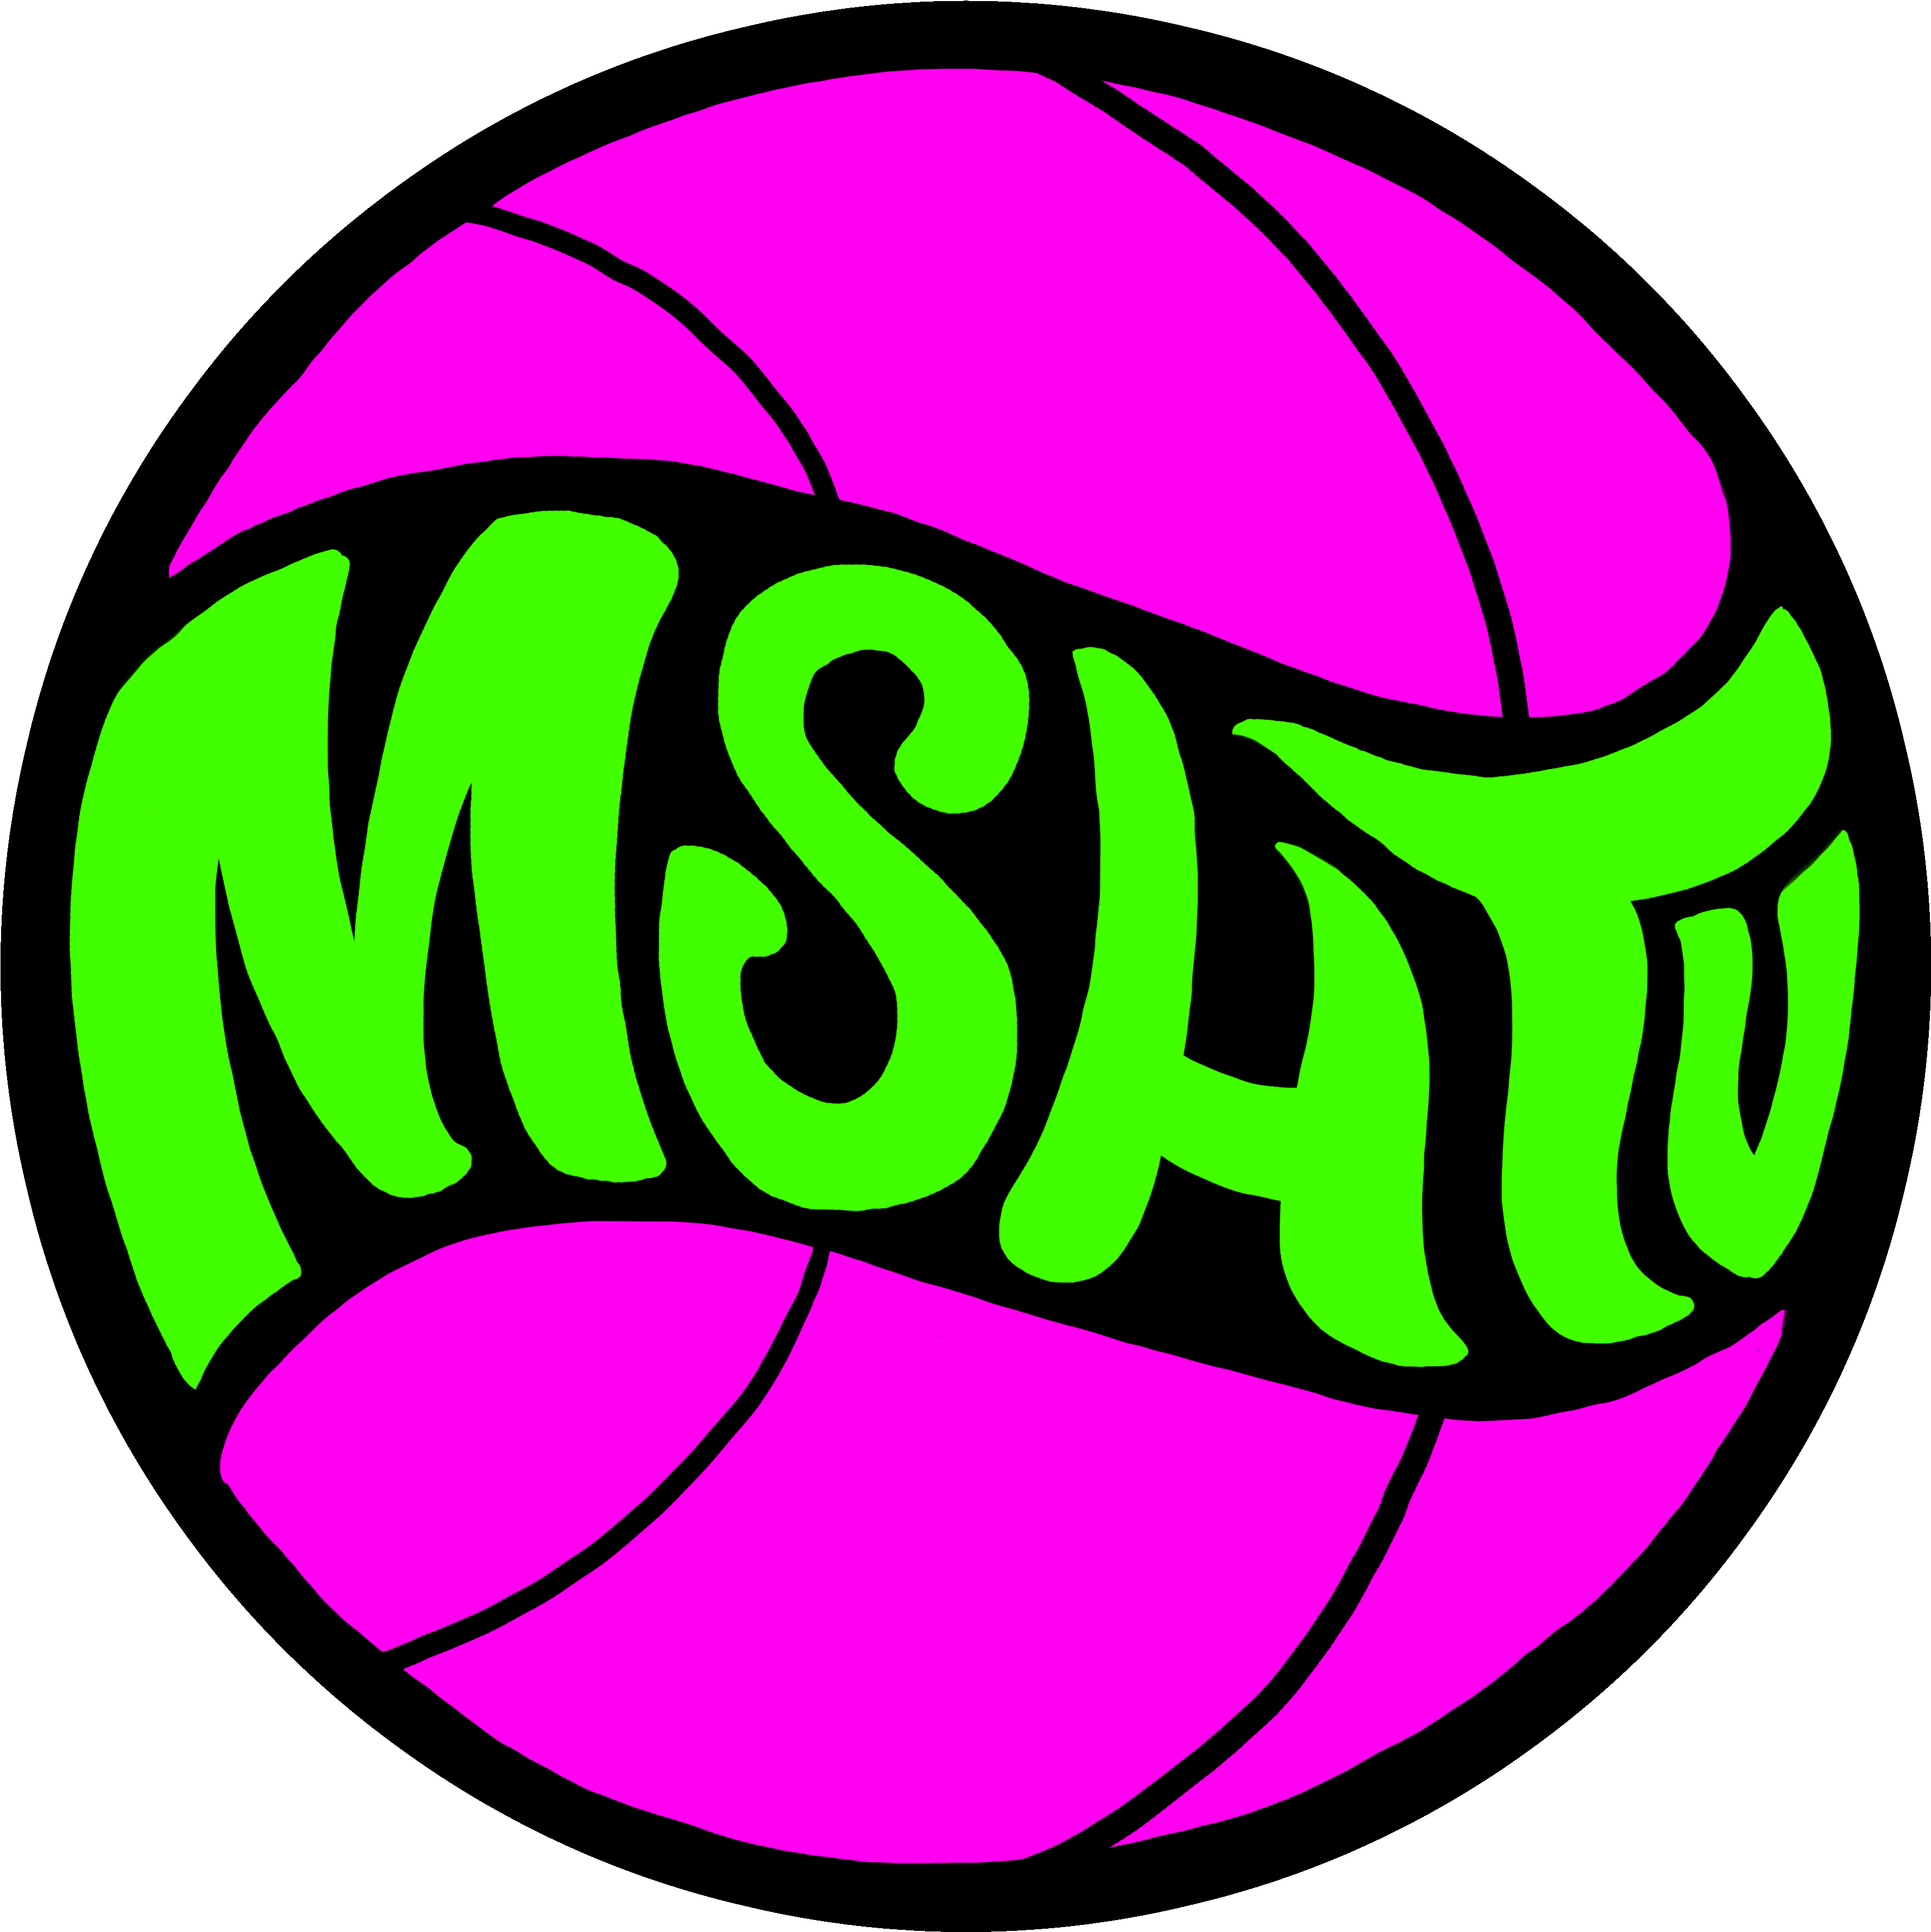 Mshtv Camp Green Pink Logo - Mikey Williams 8th Grade (4200x4200)